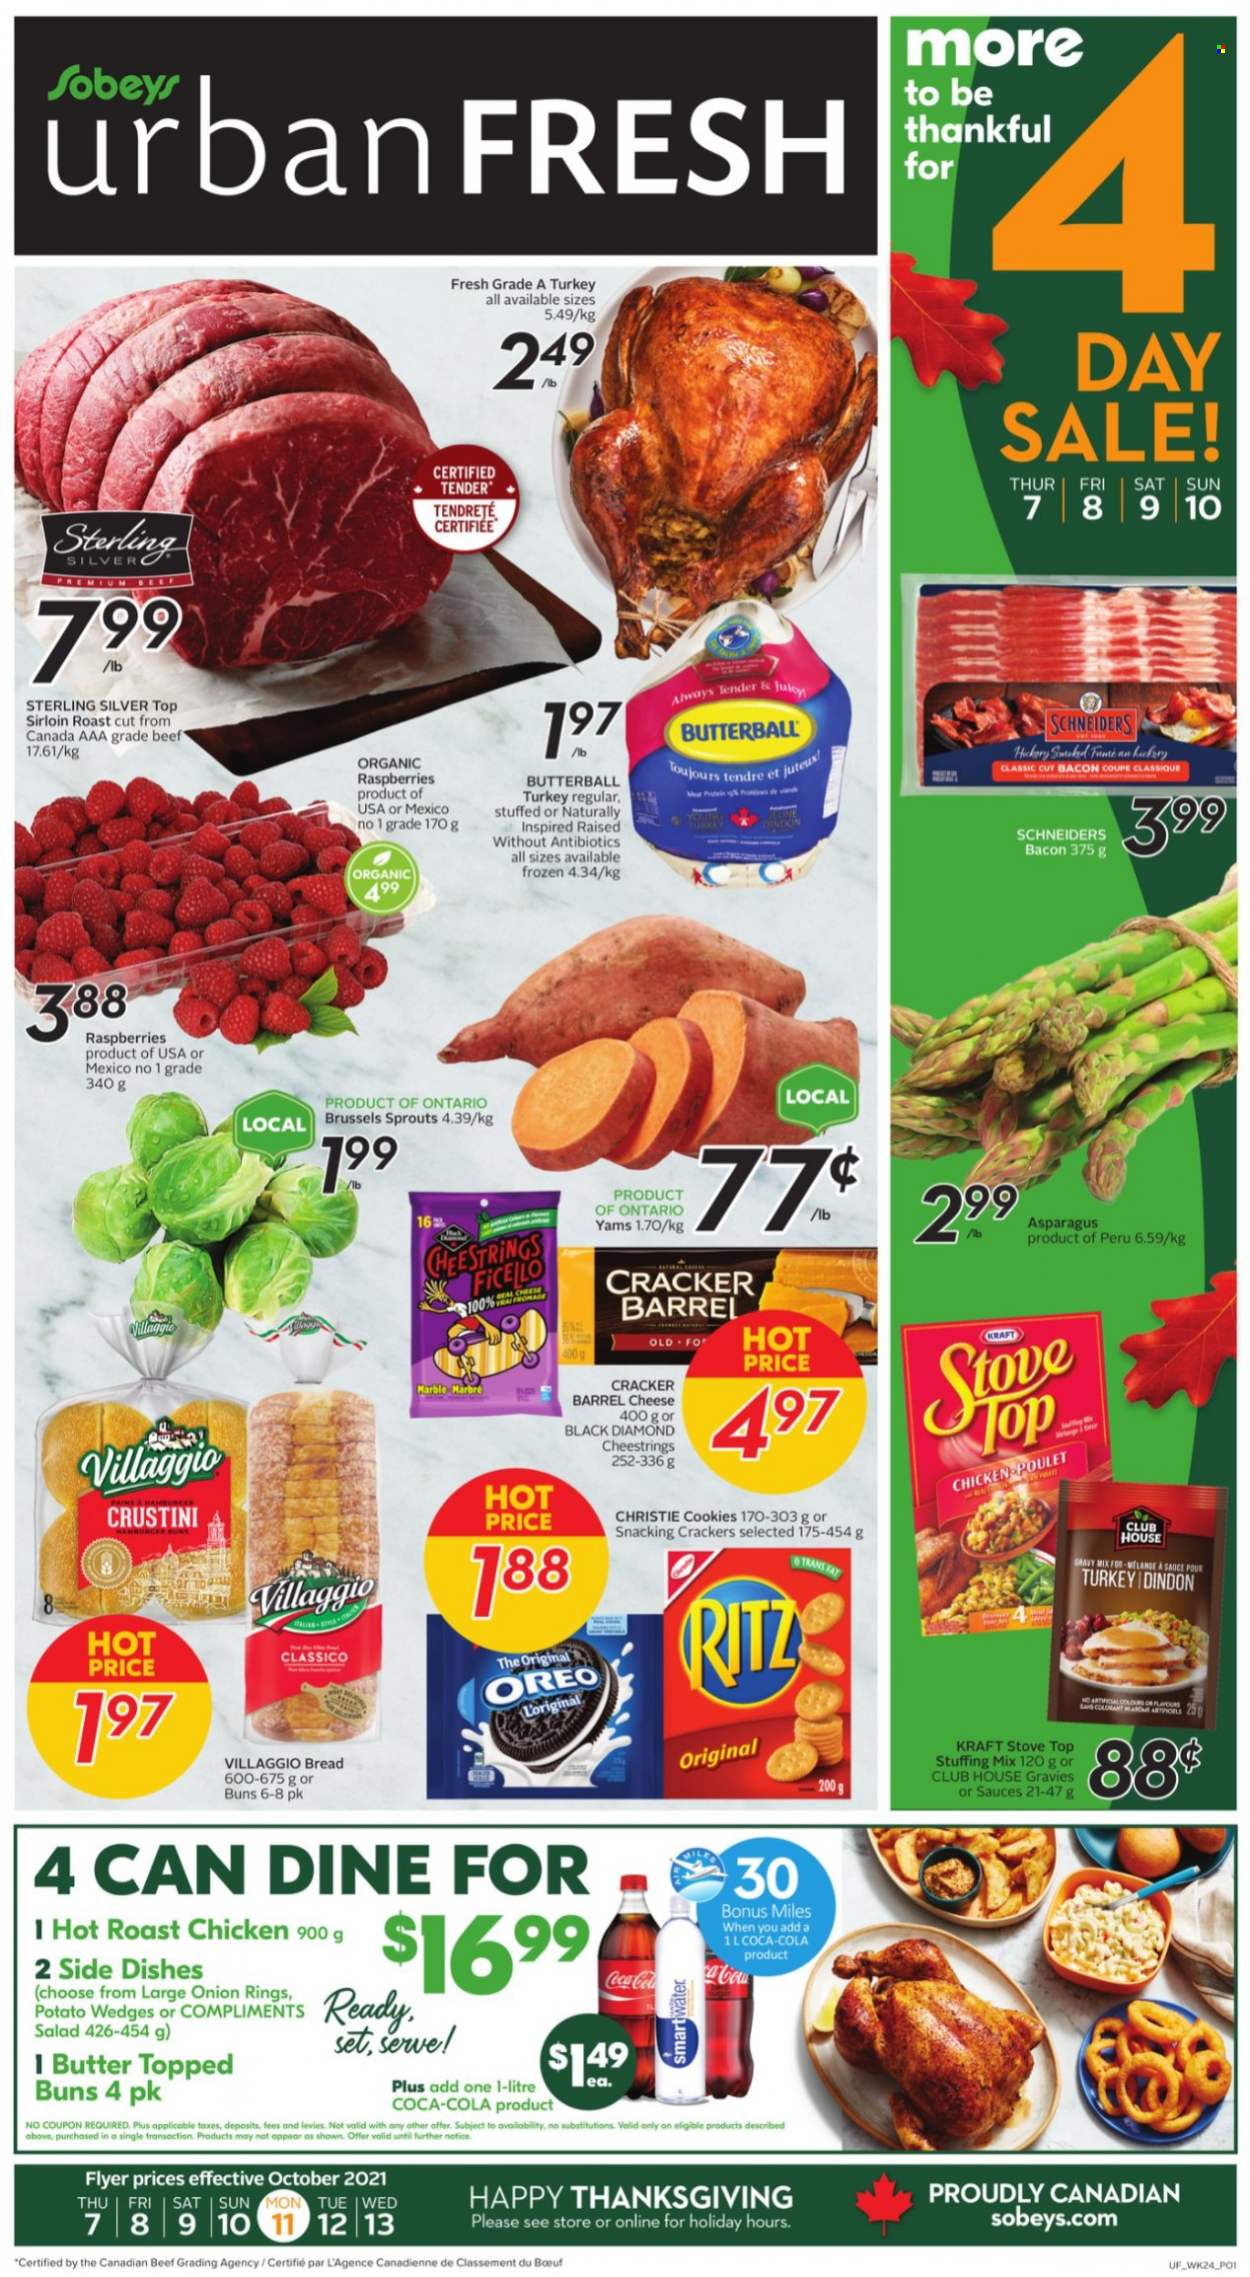 thumbnail - Sobeys Urban Fresh Flyer - October 07, 2021 - October 13, 2021 - Sales products - bread, buns, asparagus, salad, brussel sprouts, chicken roast, onion rings, Kraft®, bacon, Butterball, string cheese, cheese, potato wedges, cookies, crackers, RITZ, stuffing mix, gravy mix, Classico, Coca-Cola, Oreo. Page 1.